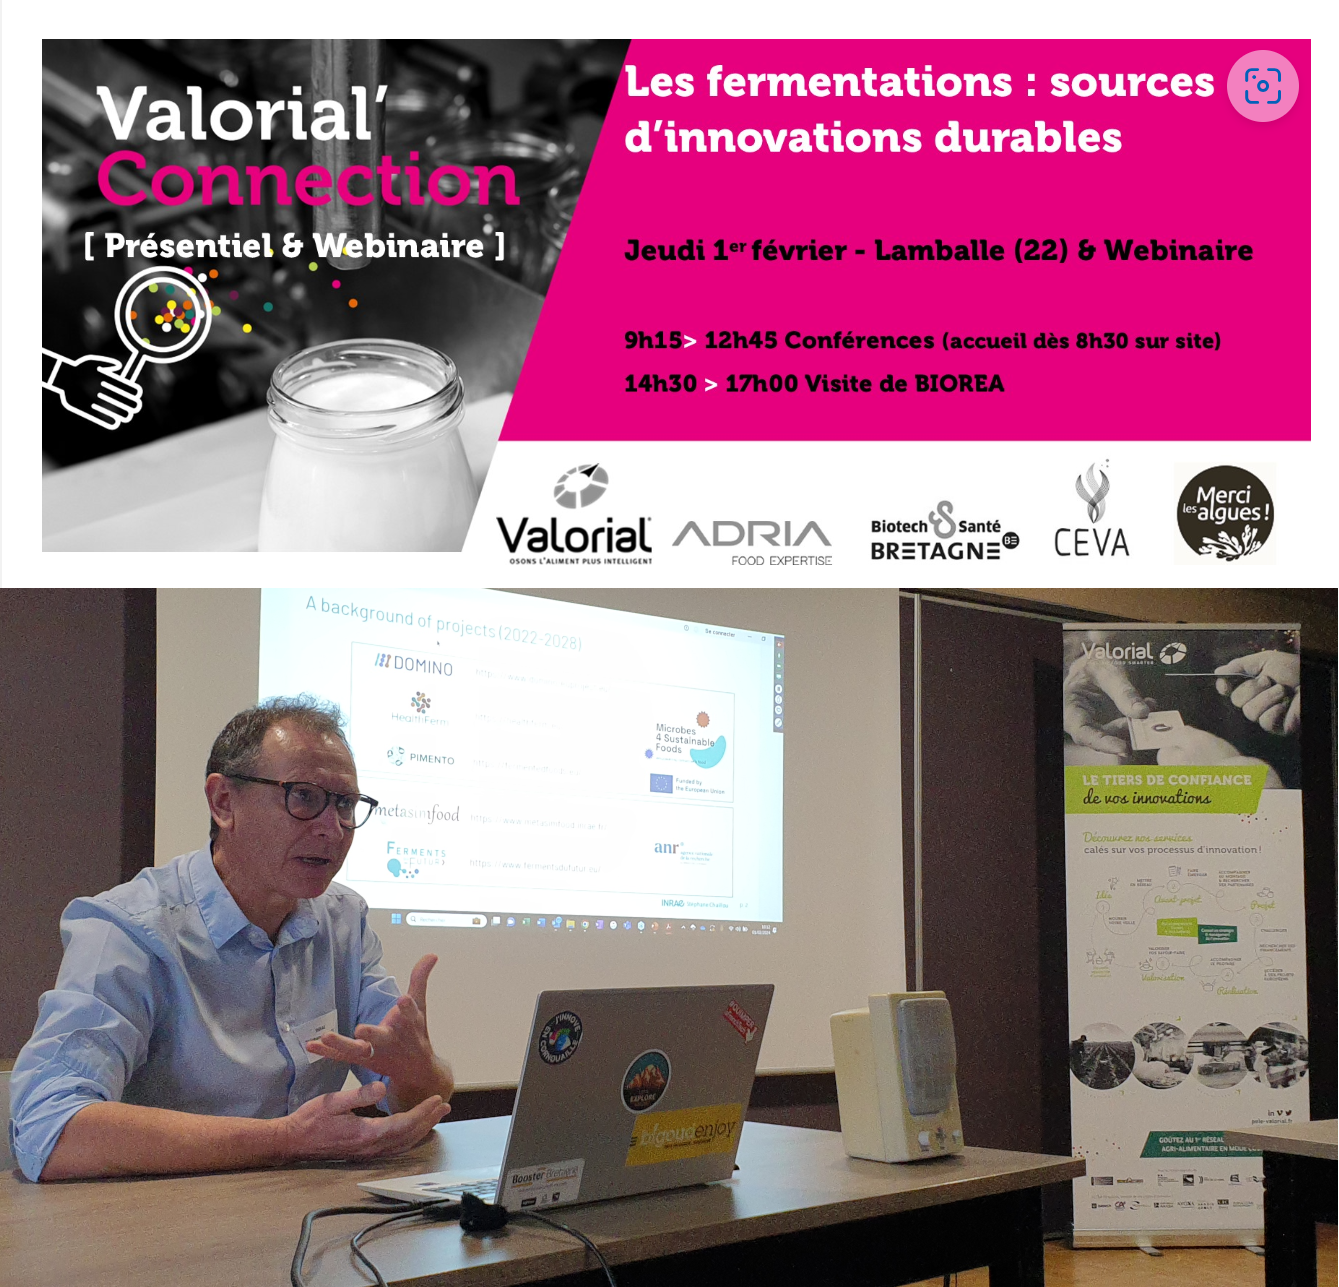 Focus on fermented foods at Valorial’Connection 